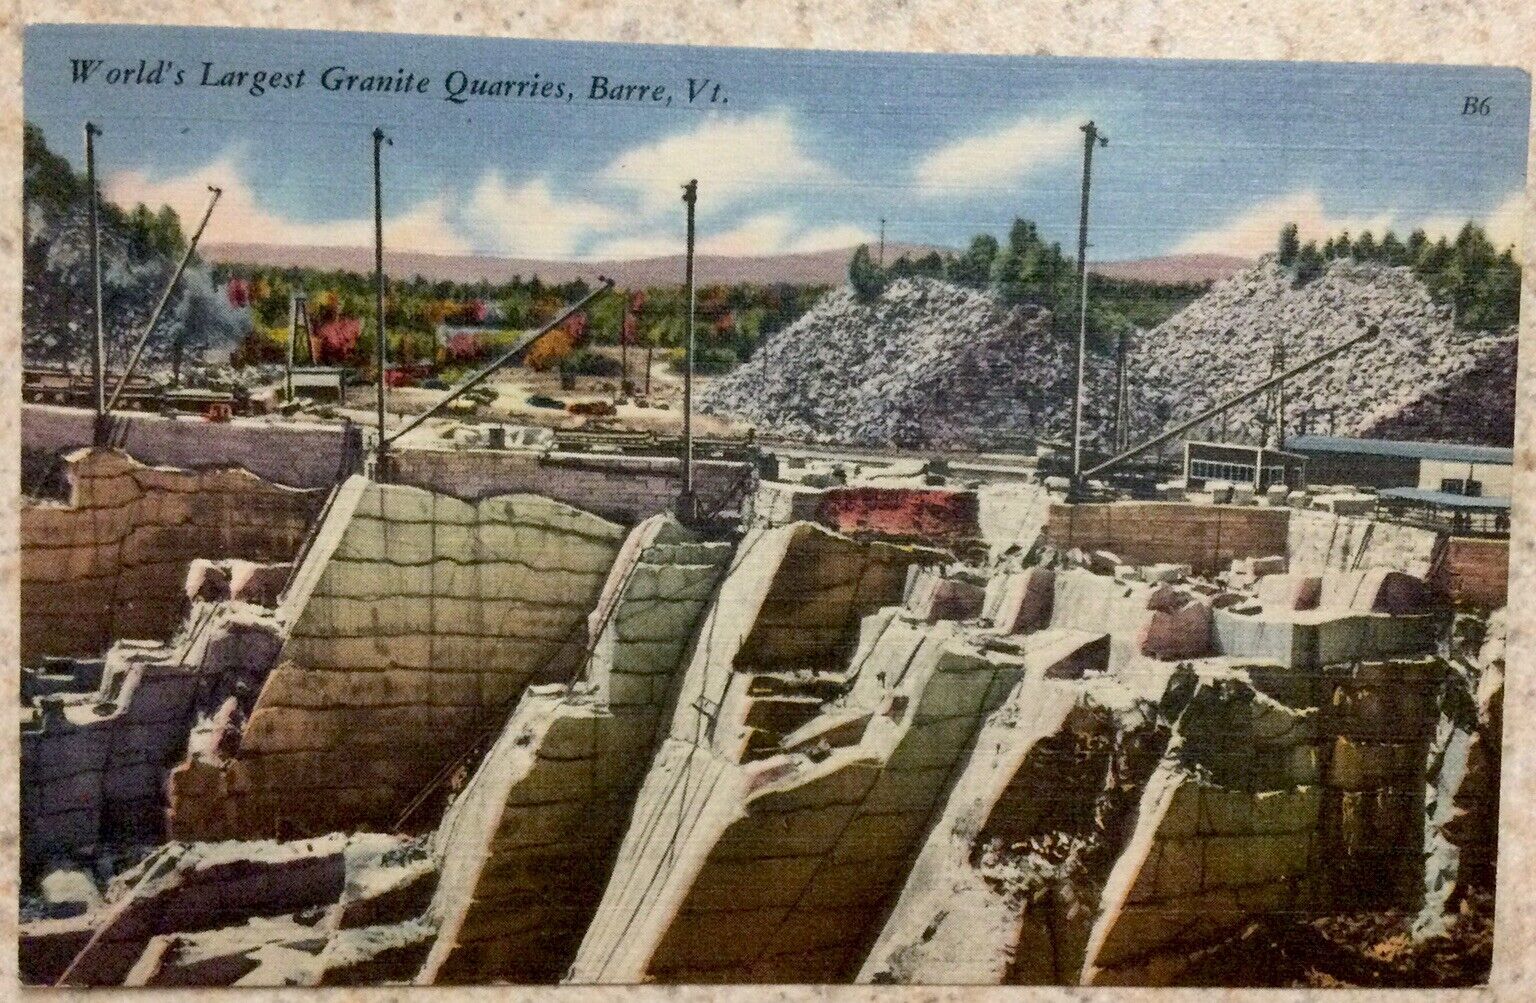 Postcard c1954 Barre Vermont Worlds Largest Granite Quarries  Rock Of Ages